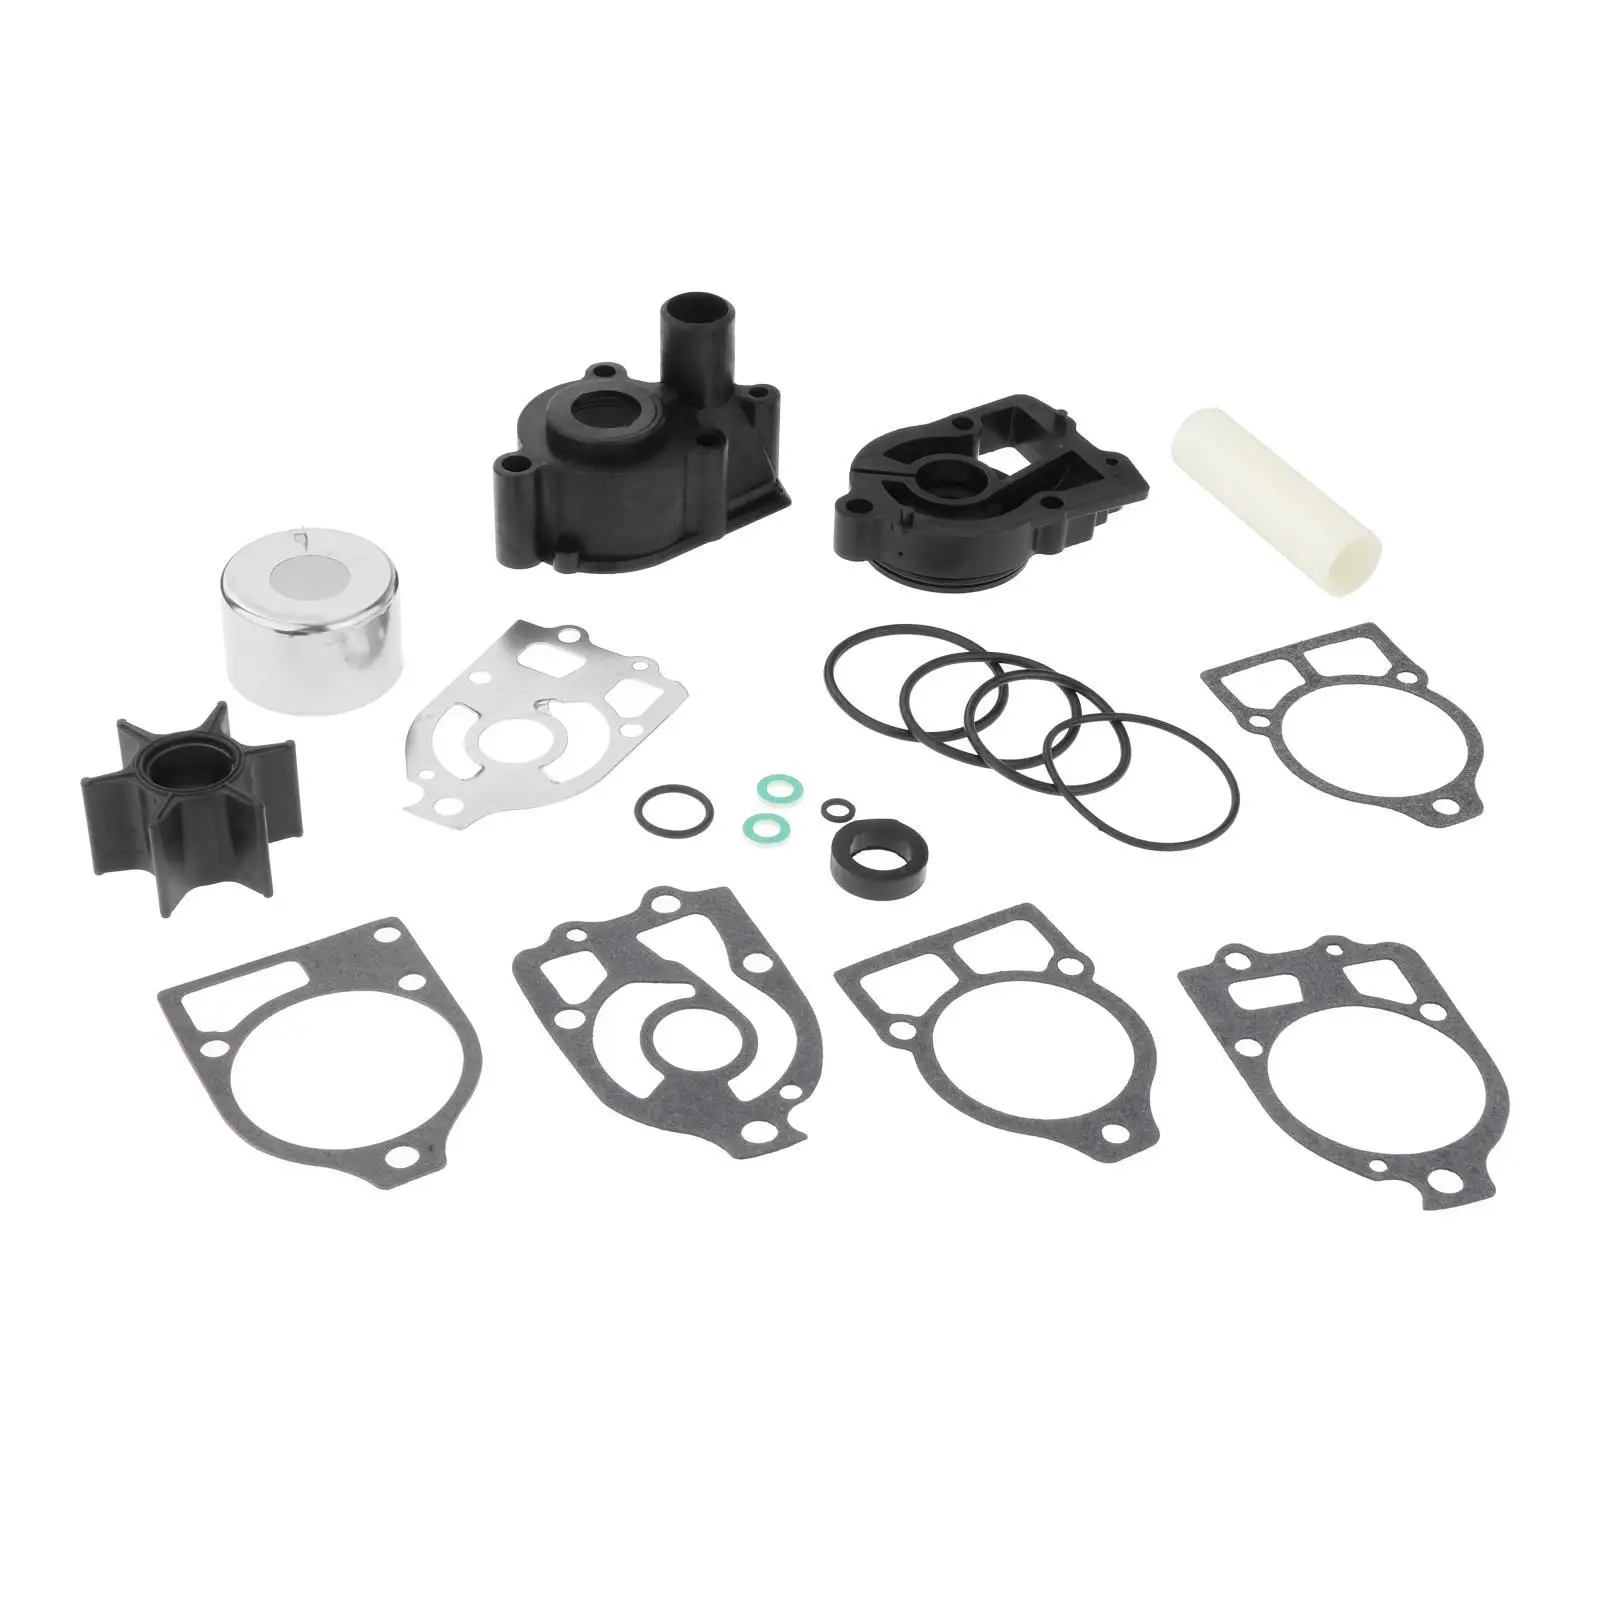 Water Pump Repair  for Easy to Install 46-96146A8 Accessories